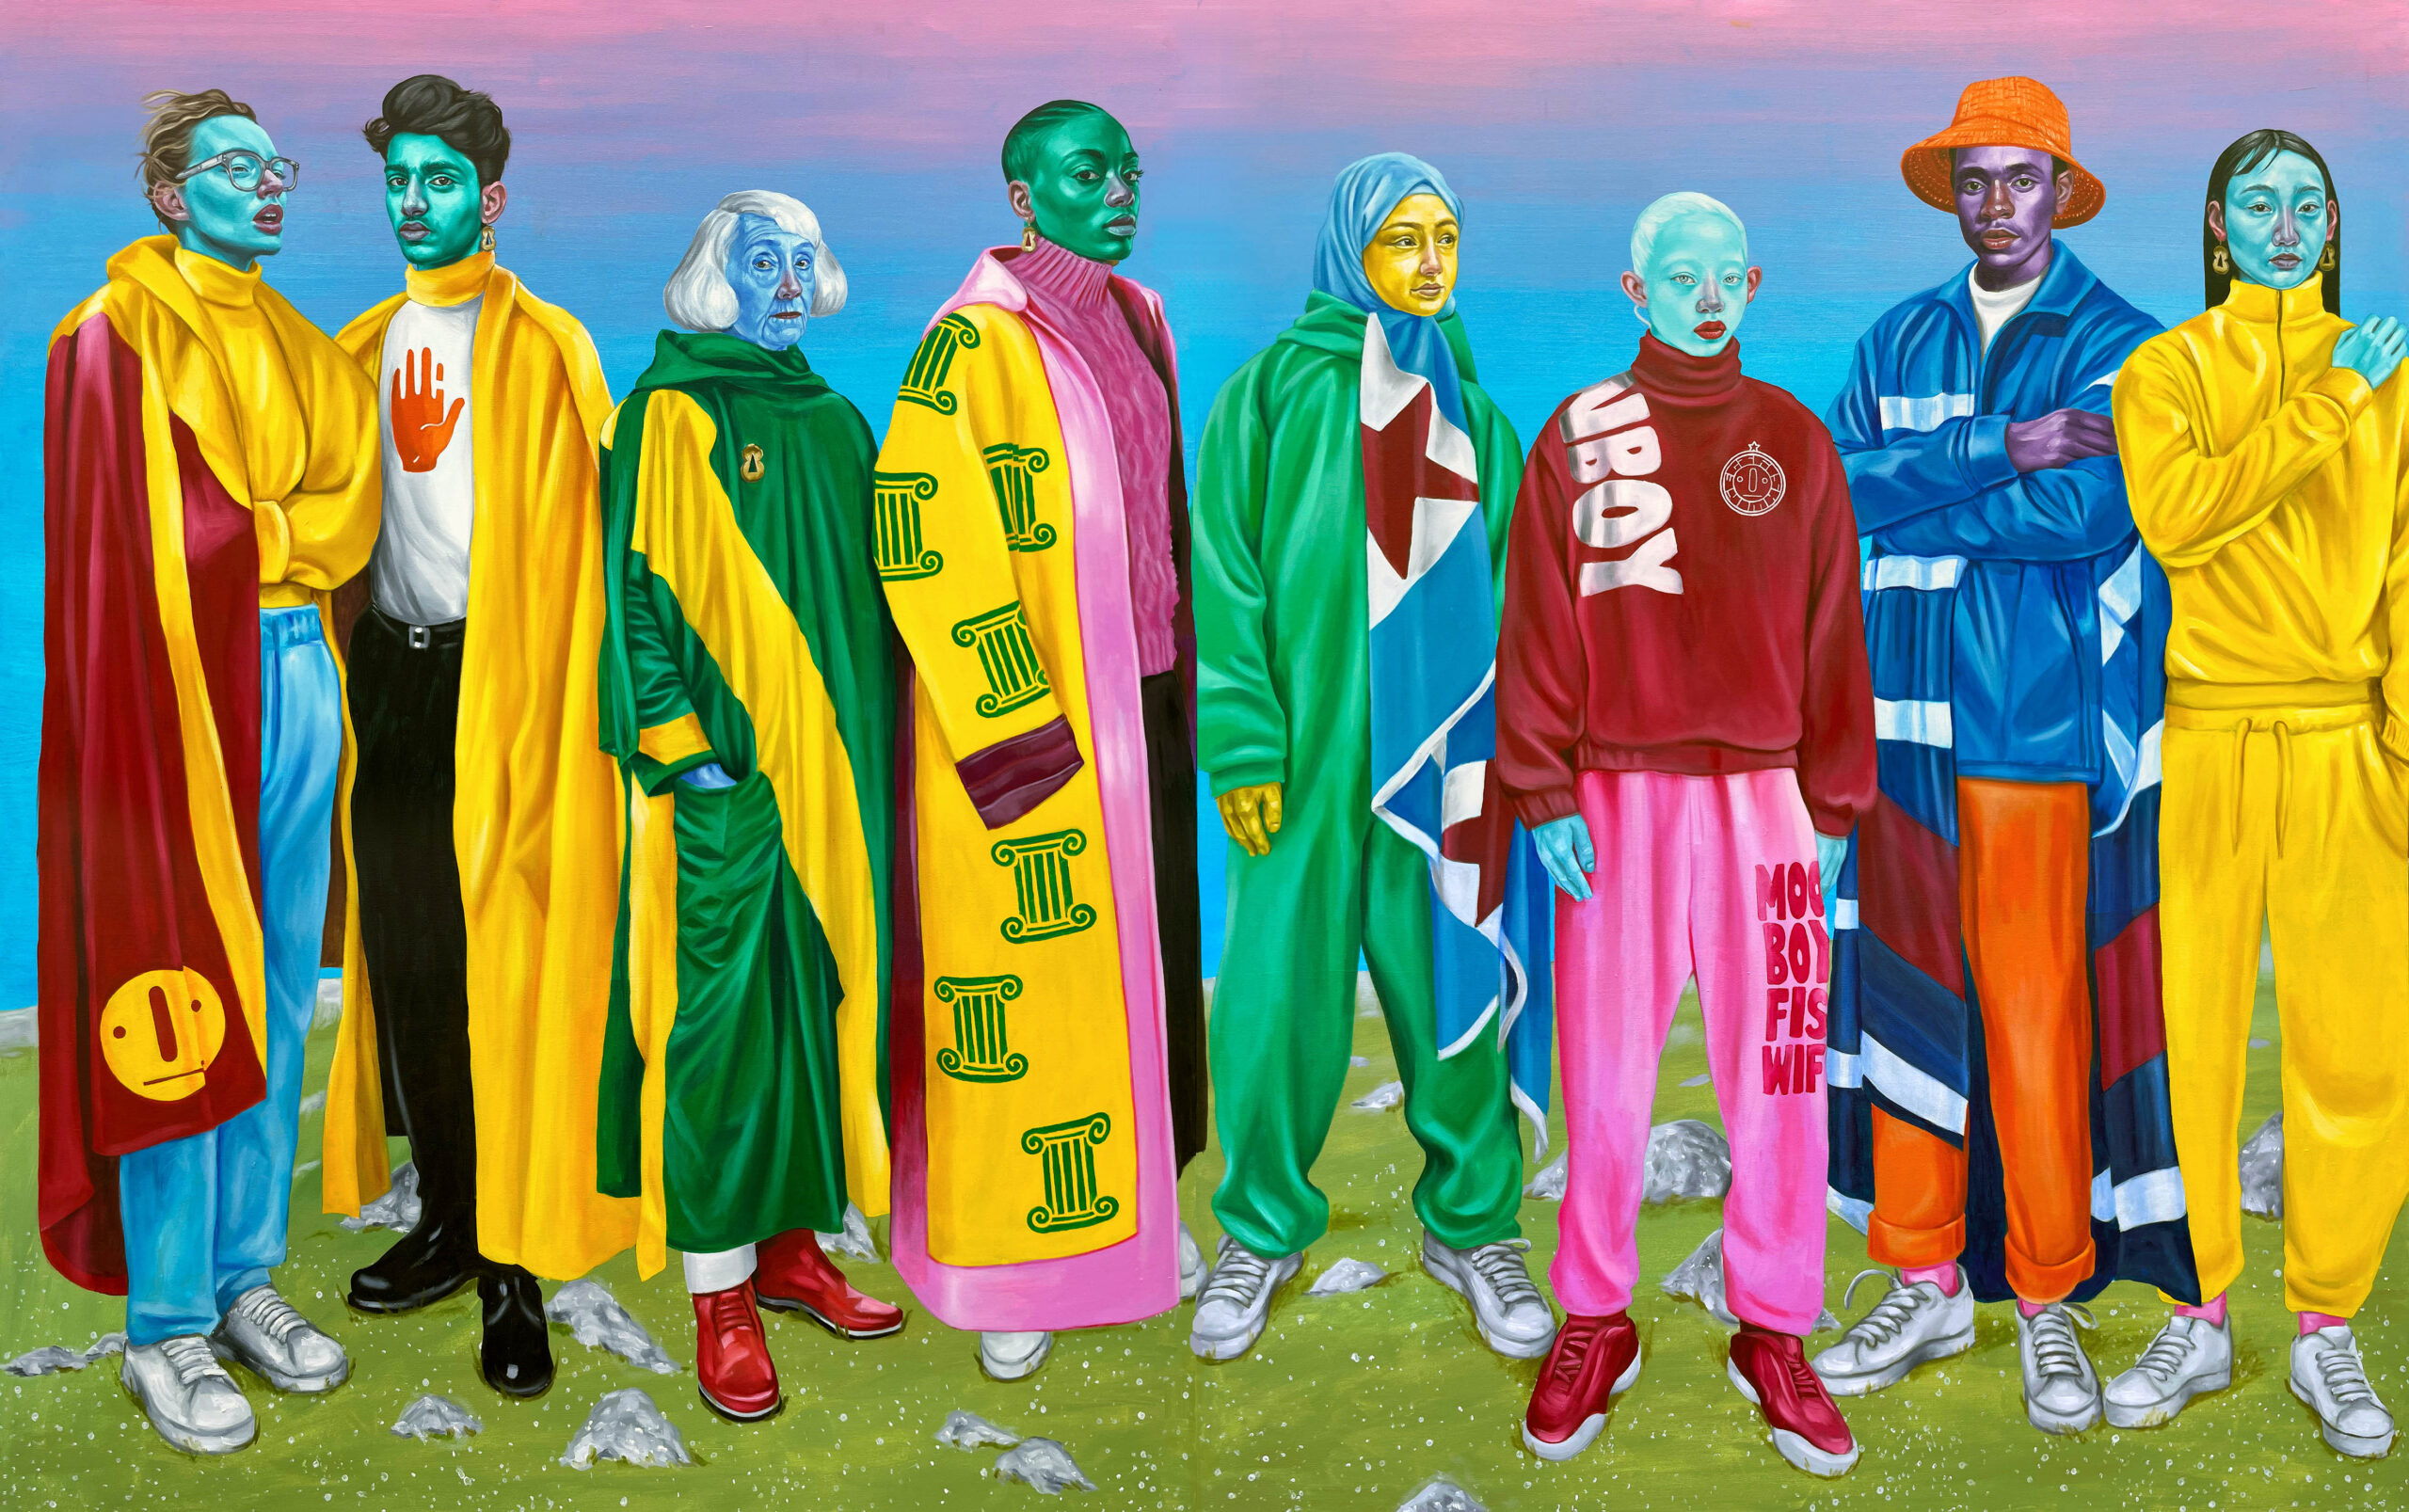 A horizontal painting of eight figures wearing colorful robes.